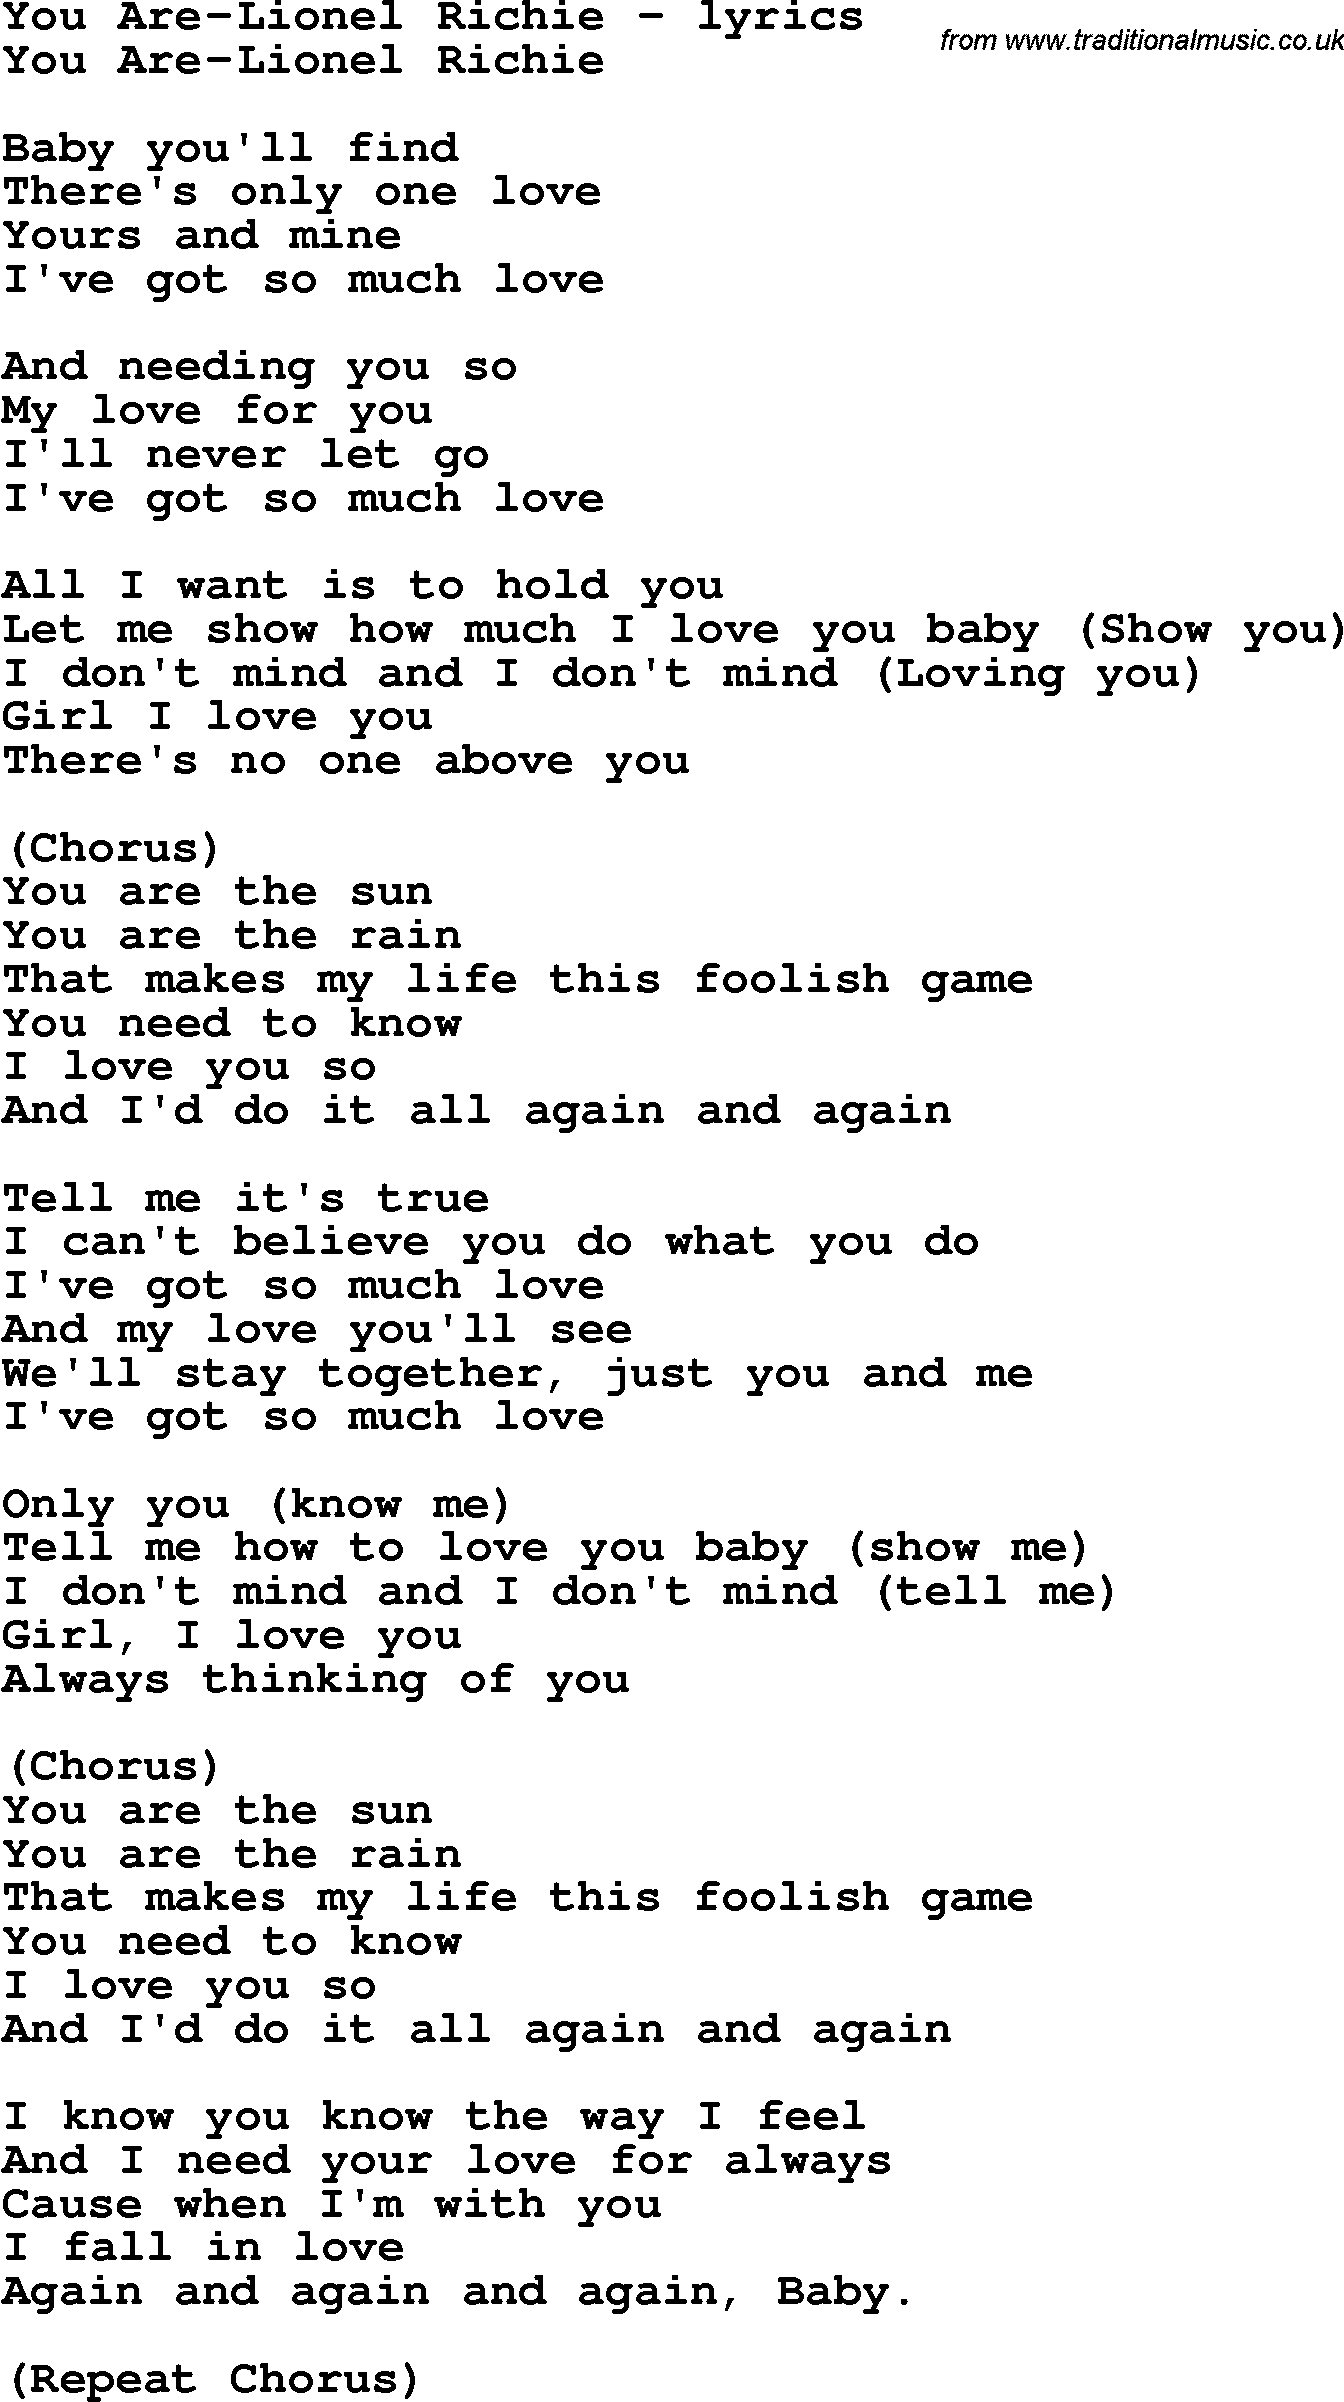 Love Song Lyrics for: You Are-Lionel Richie